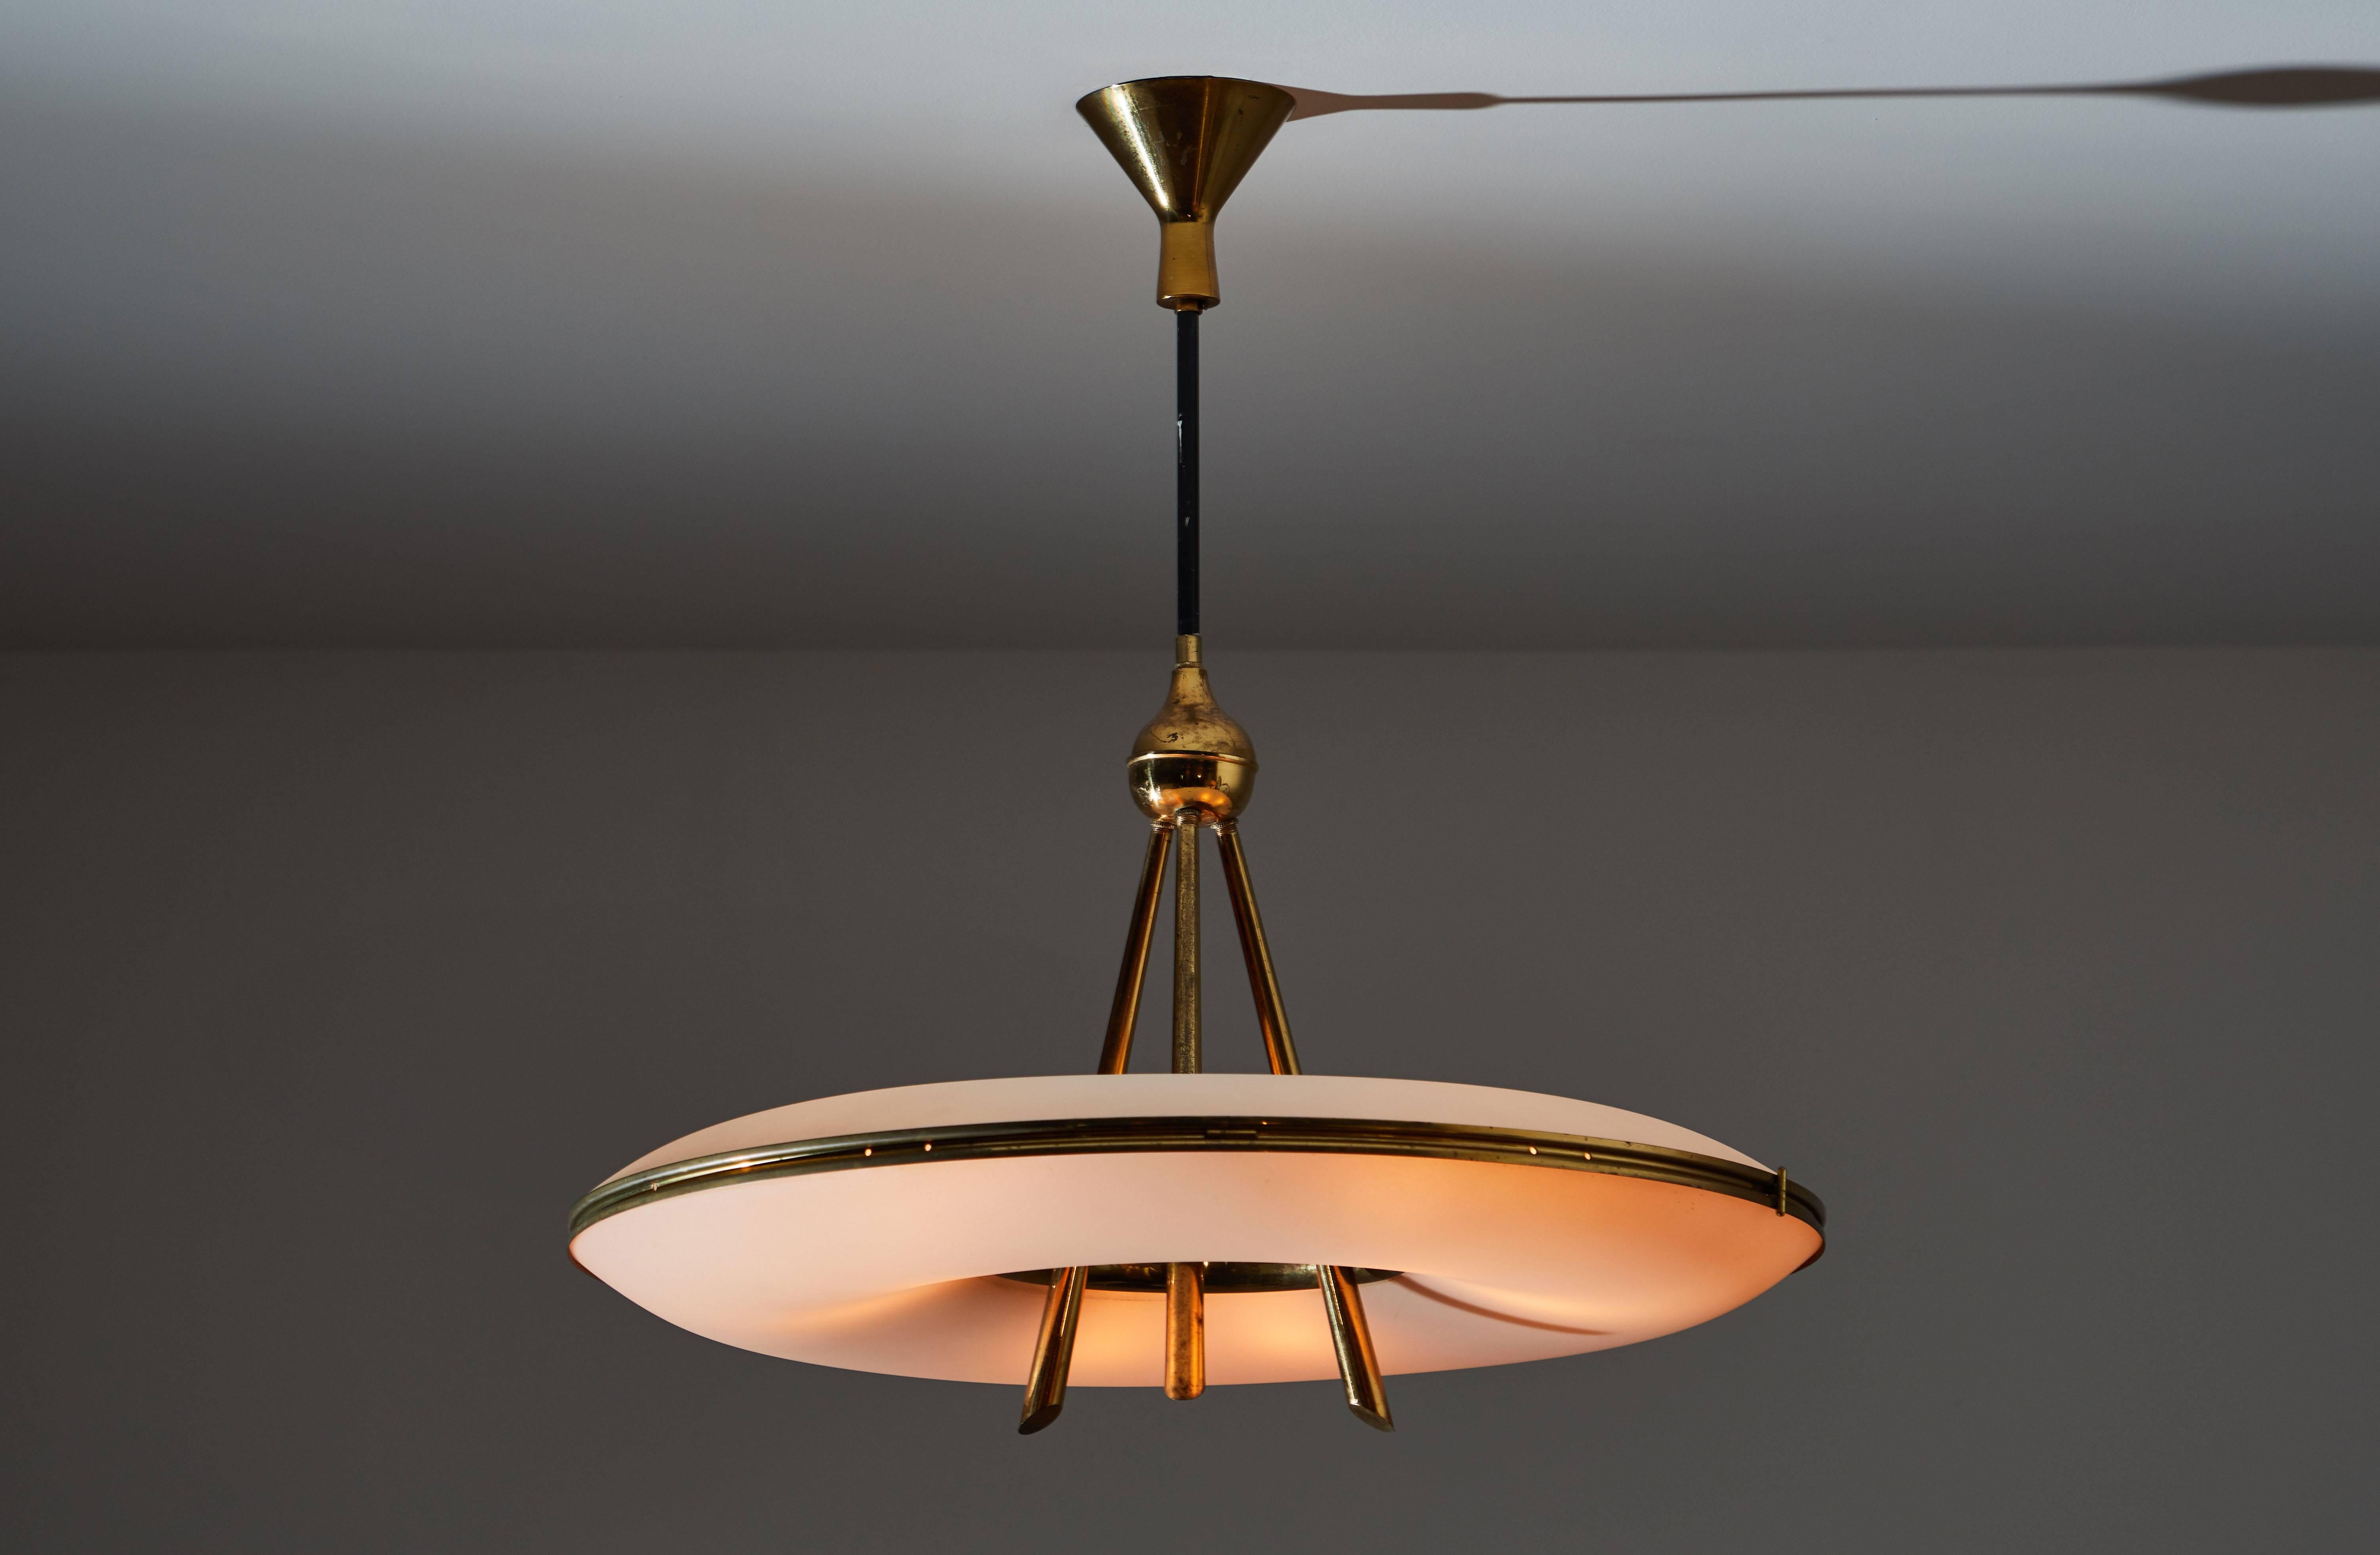 Chandelier manufactured in Italy, circa 1950s. Brass and brushed satin glass diffuser. Rewired for US junction boxes. Original canopy. Takes three E14 European candelabra 60w maximum per bulb.